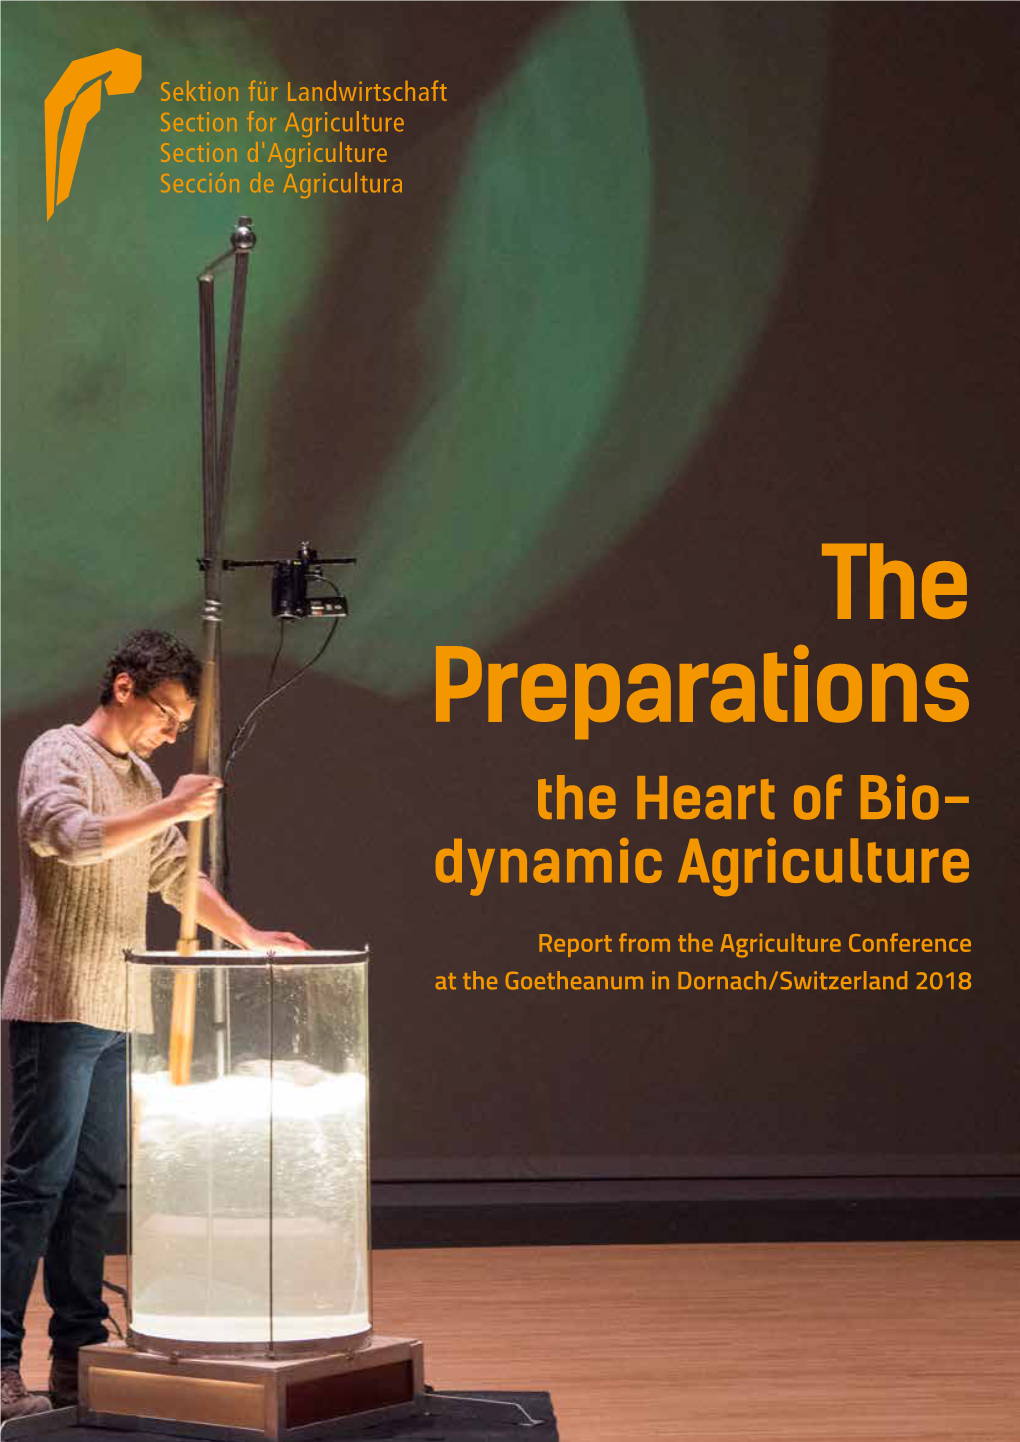 Report on the Preparations: the Heart of Biodynamic Agriculture